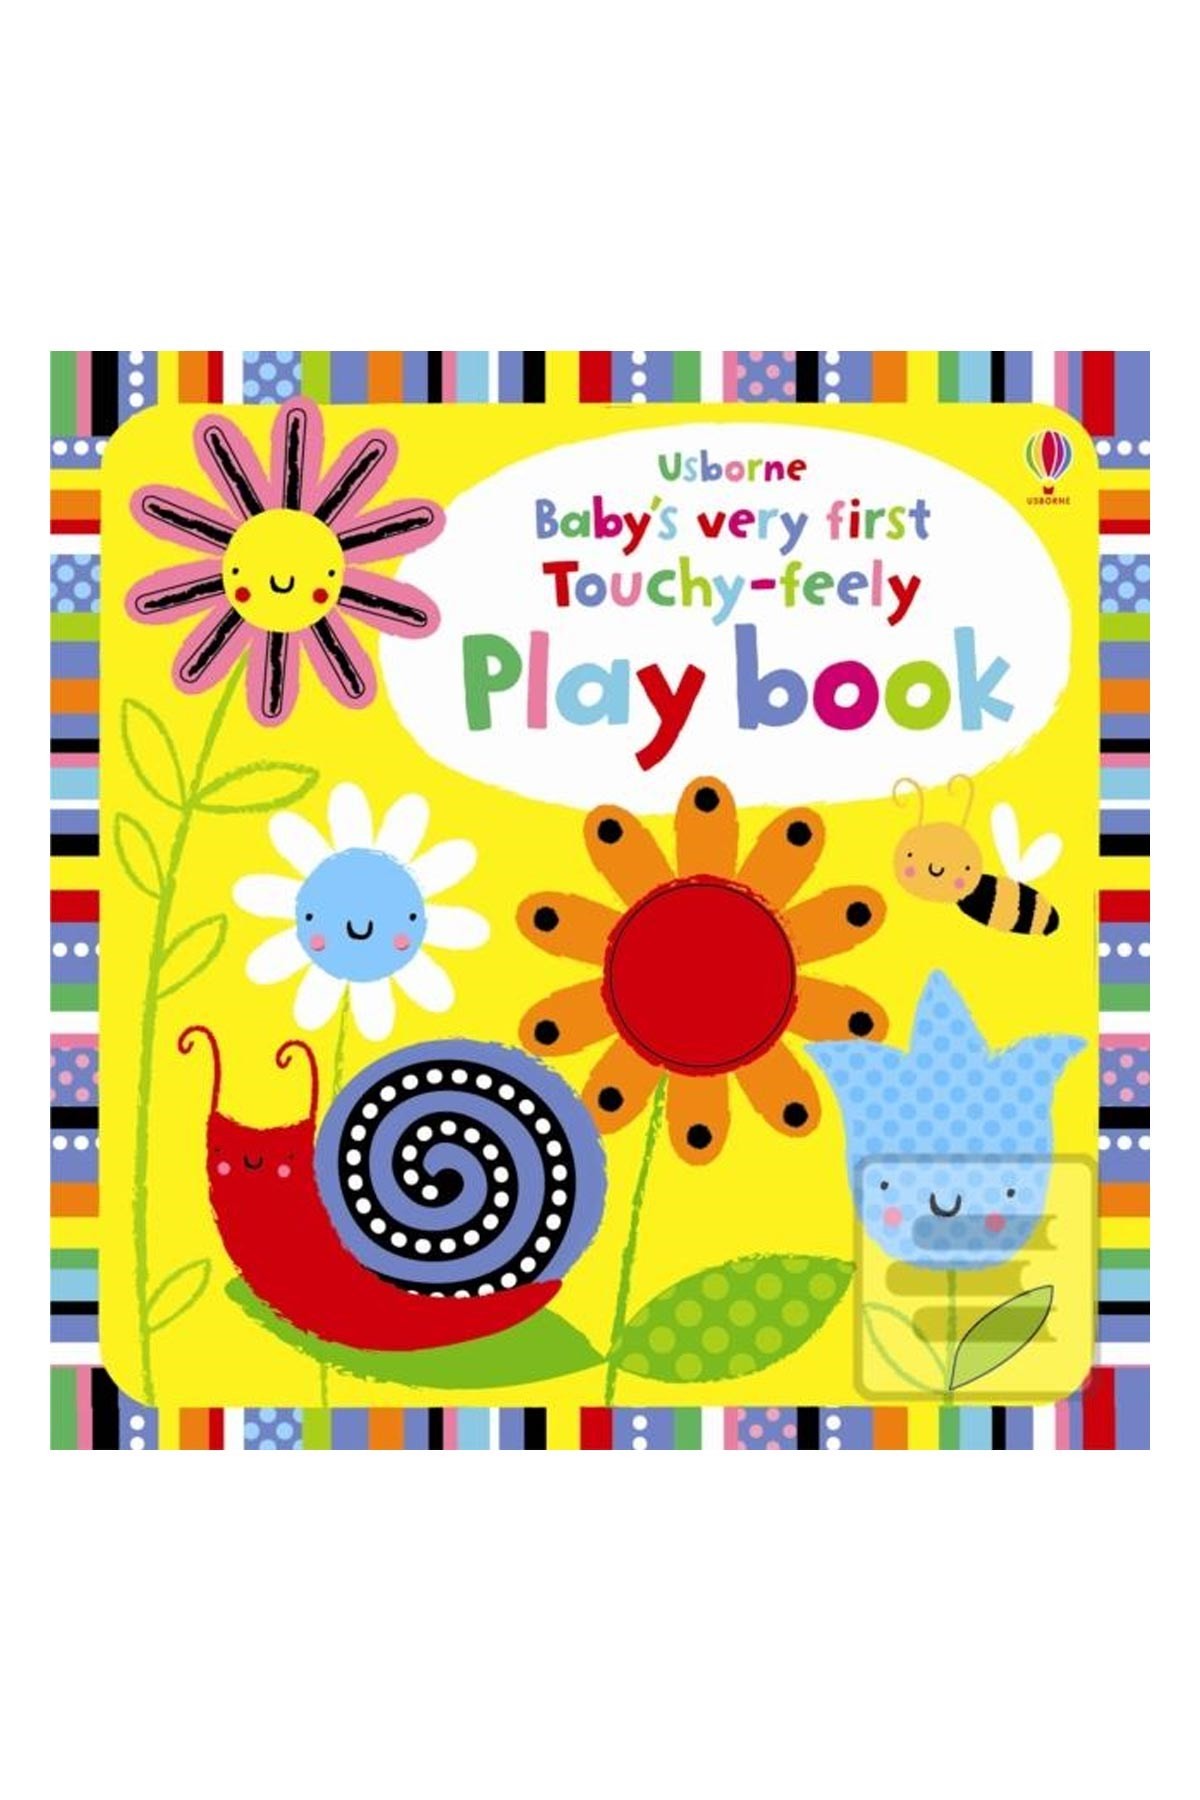 The Usborne Babys Very First Touchy-Feely Playbook